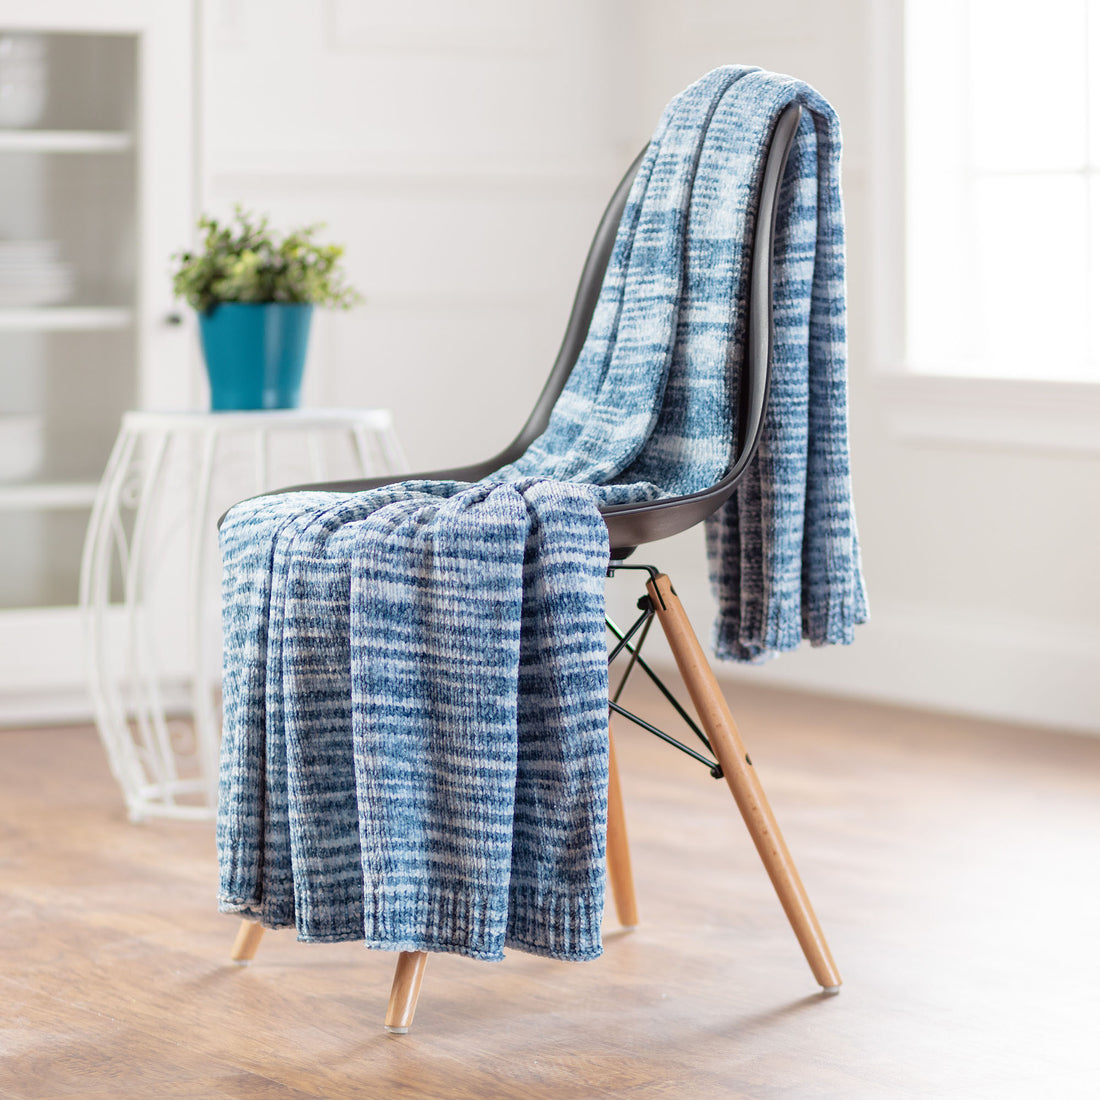 Blue Ombre Chenille Throw Blanket